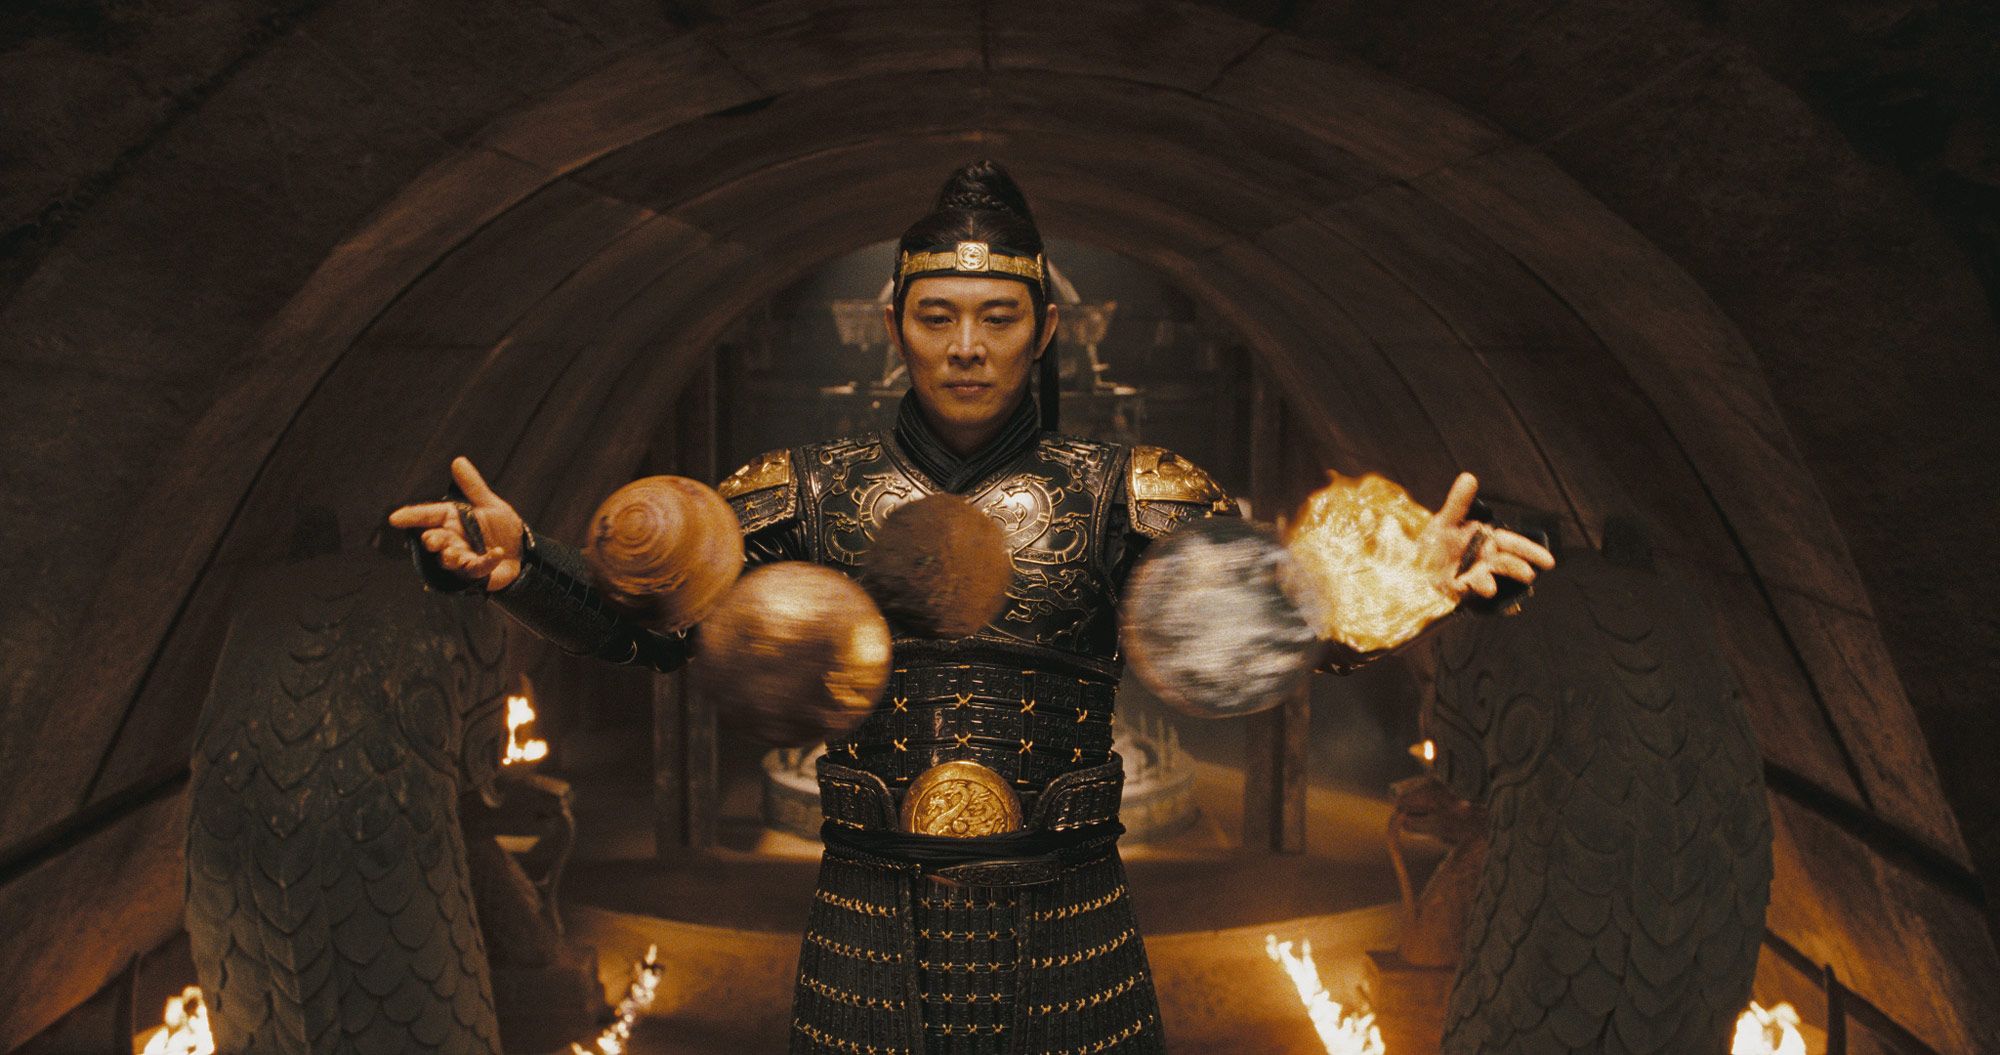 The Mummy: Tomb of the Dragon Emperor Photots